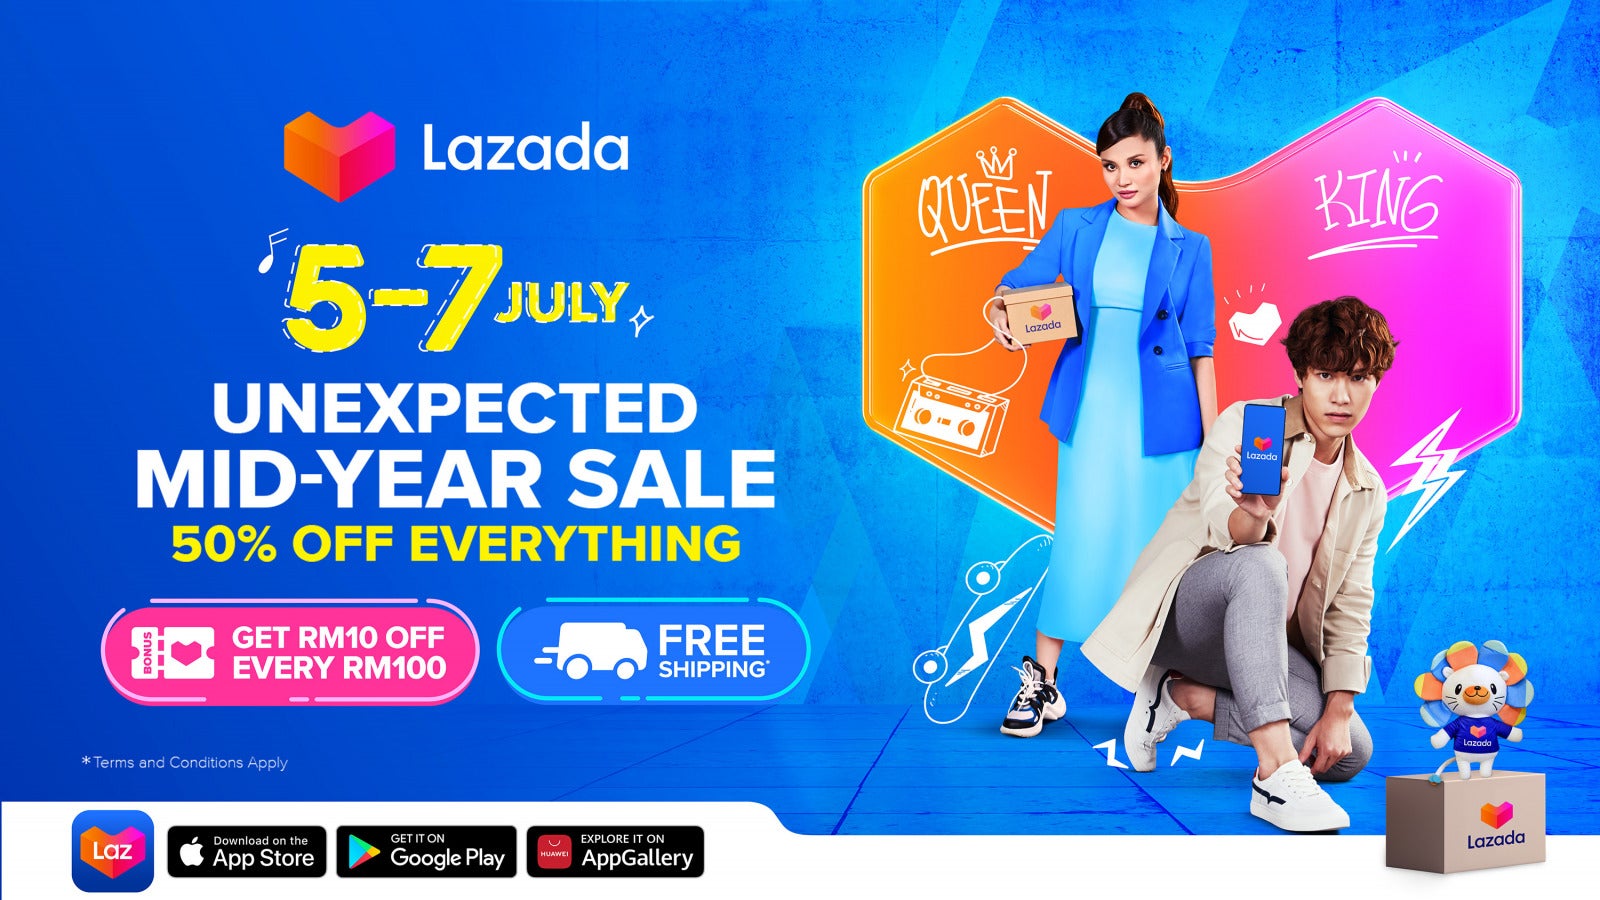 Photo 1 Lazada Unexpected Mid Year Sale